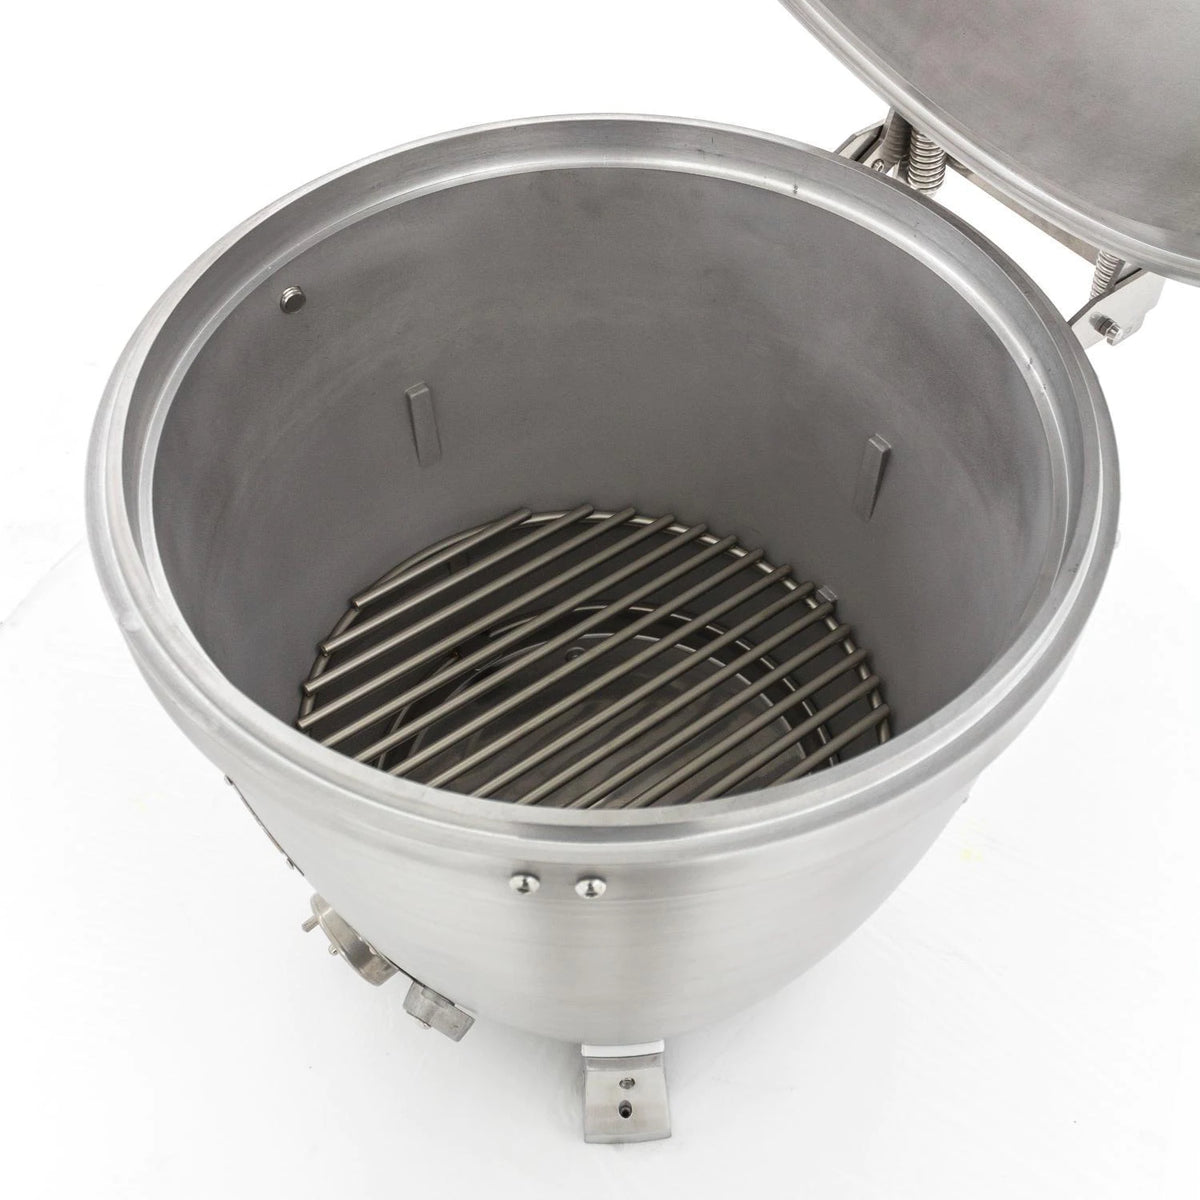 Blaze 20 Inch Cast Aluminum Kamado Middle Cooking Grate Stainless Steel Charcoal Grate